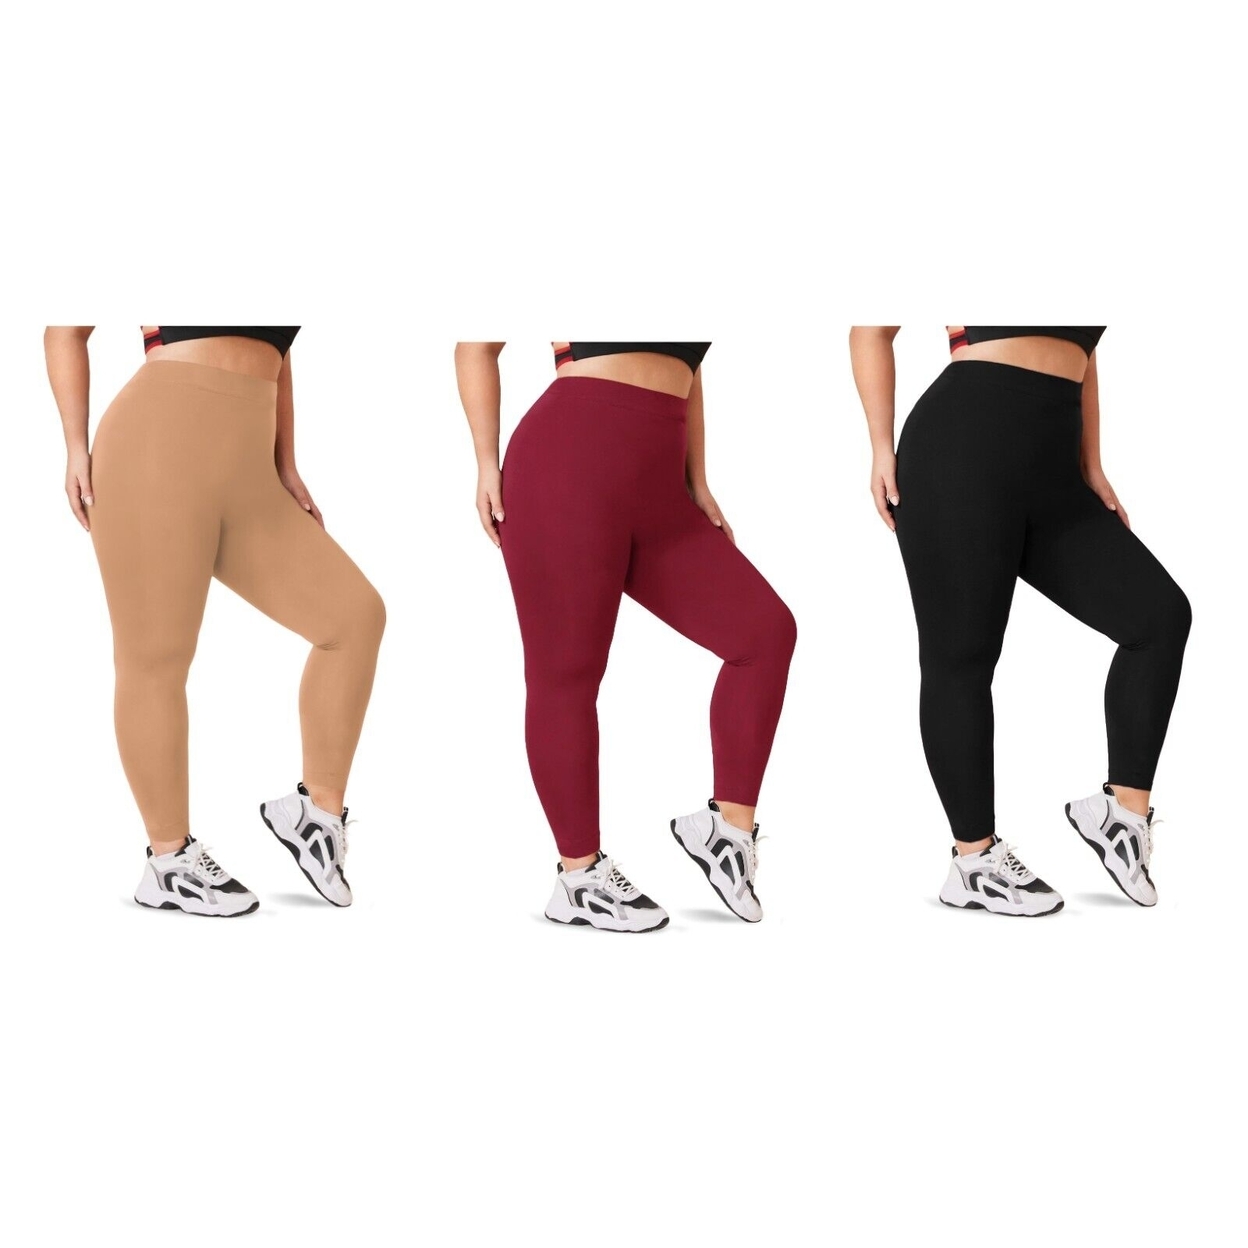 2-Pack: Women's Casual Ultra-Soft Smooth High Waisted Athletic Active Yoga Leggings Plus Size Available - Red & Black, 4x